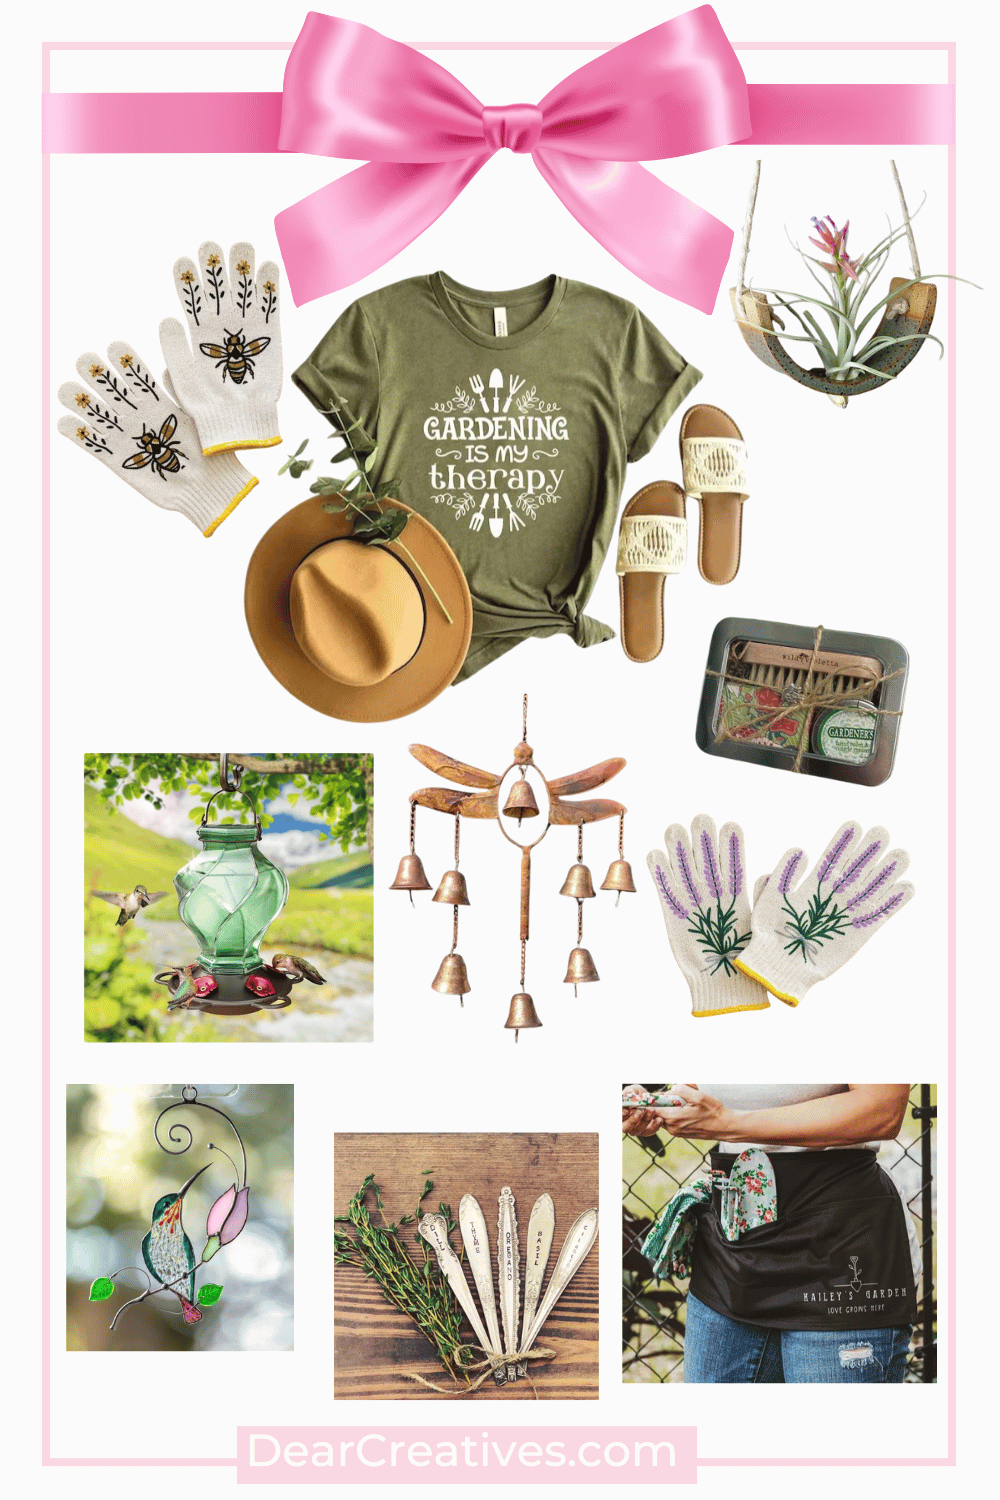 Gardening Mother's Day Gifts For Moms With a Green Thumb - These Gardening Gifts are the best gifts to give Mom (or Grandma) who loves to garden! DearCreatives.com